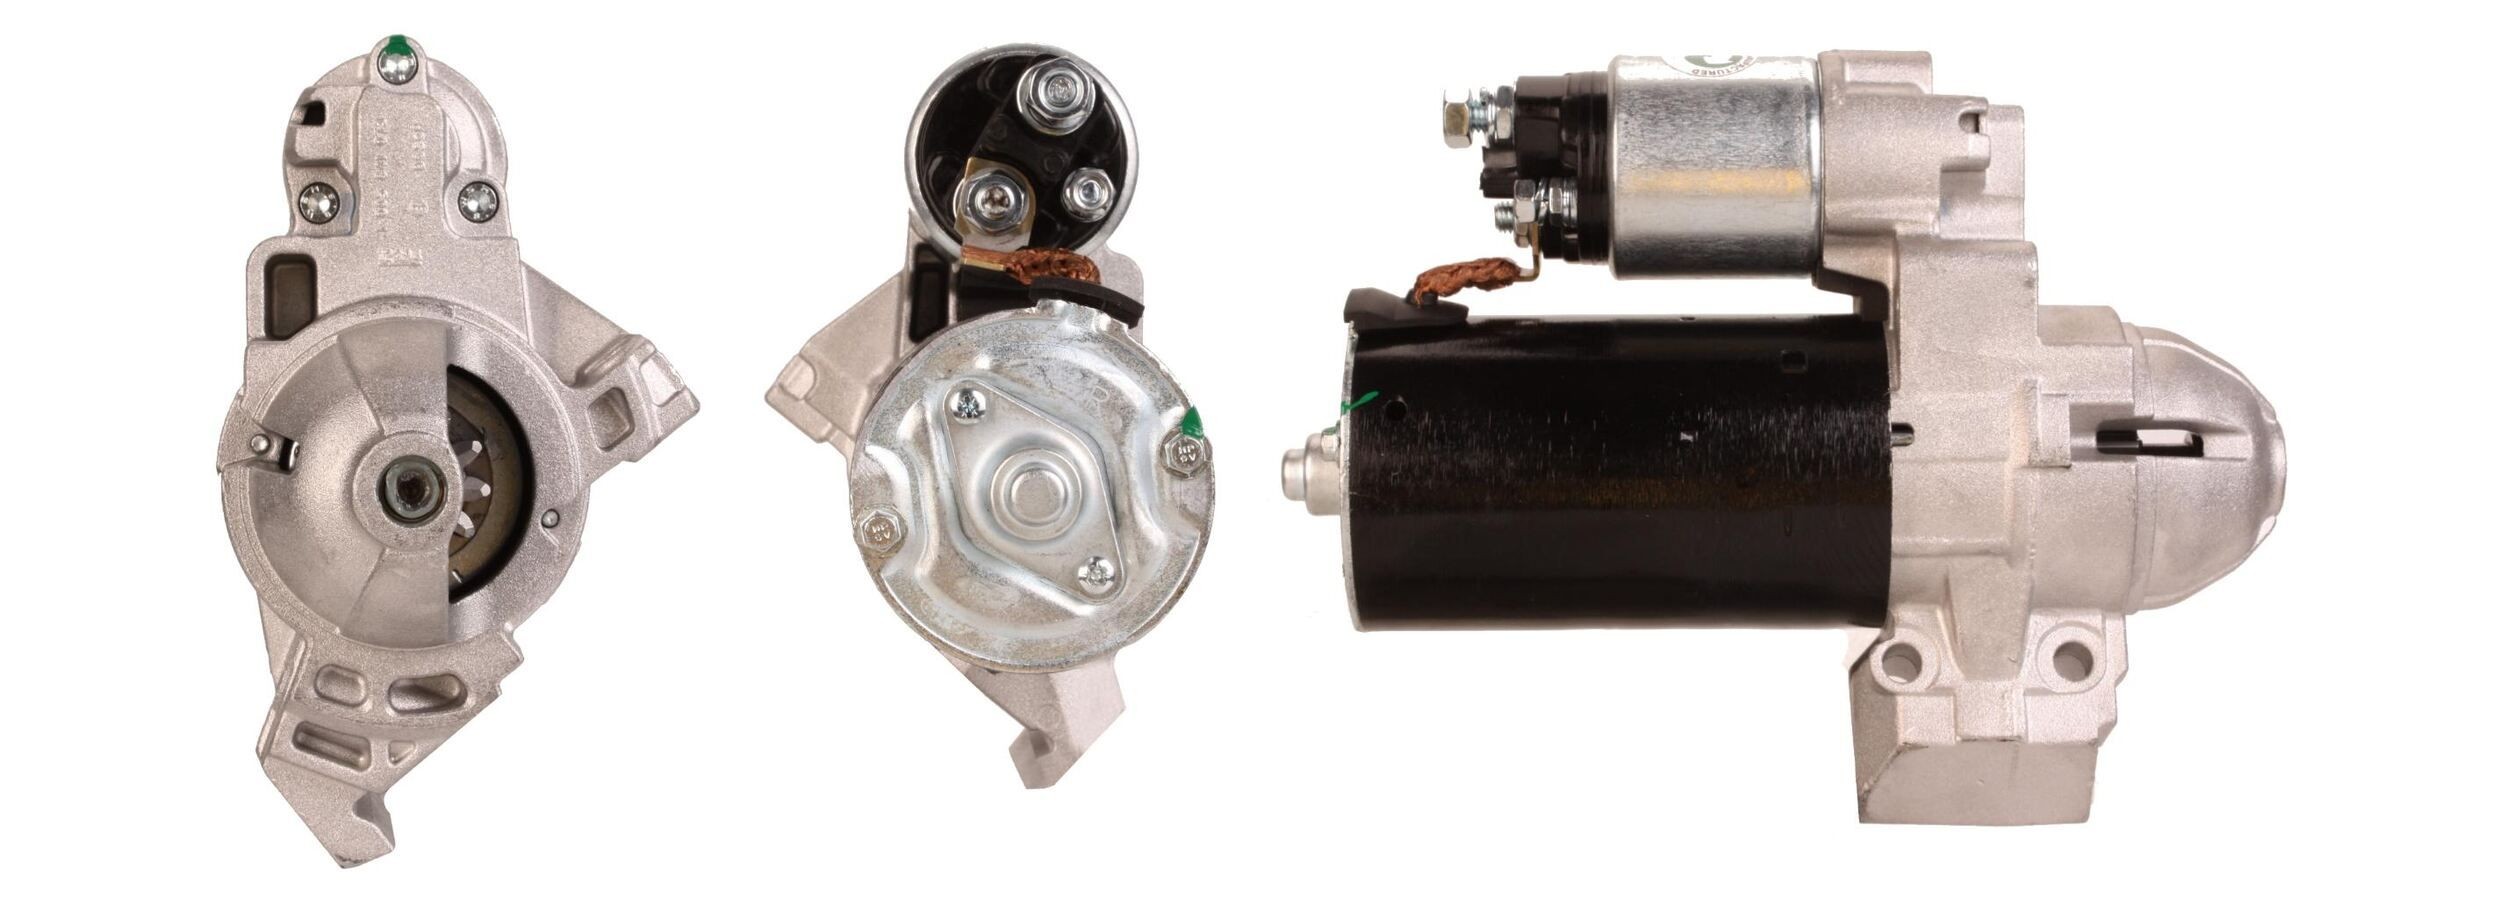 ELSTOCK 25-4164 Starter motor BMW experience and price